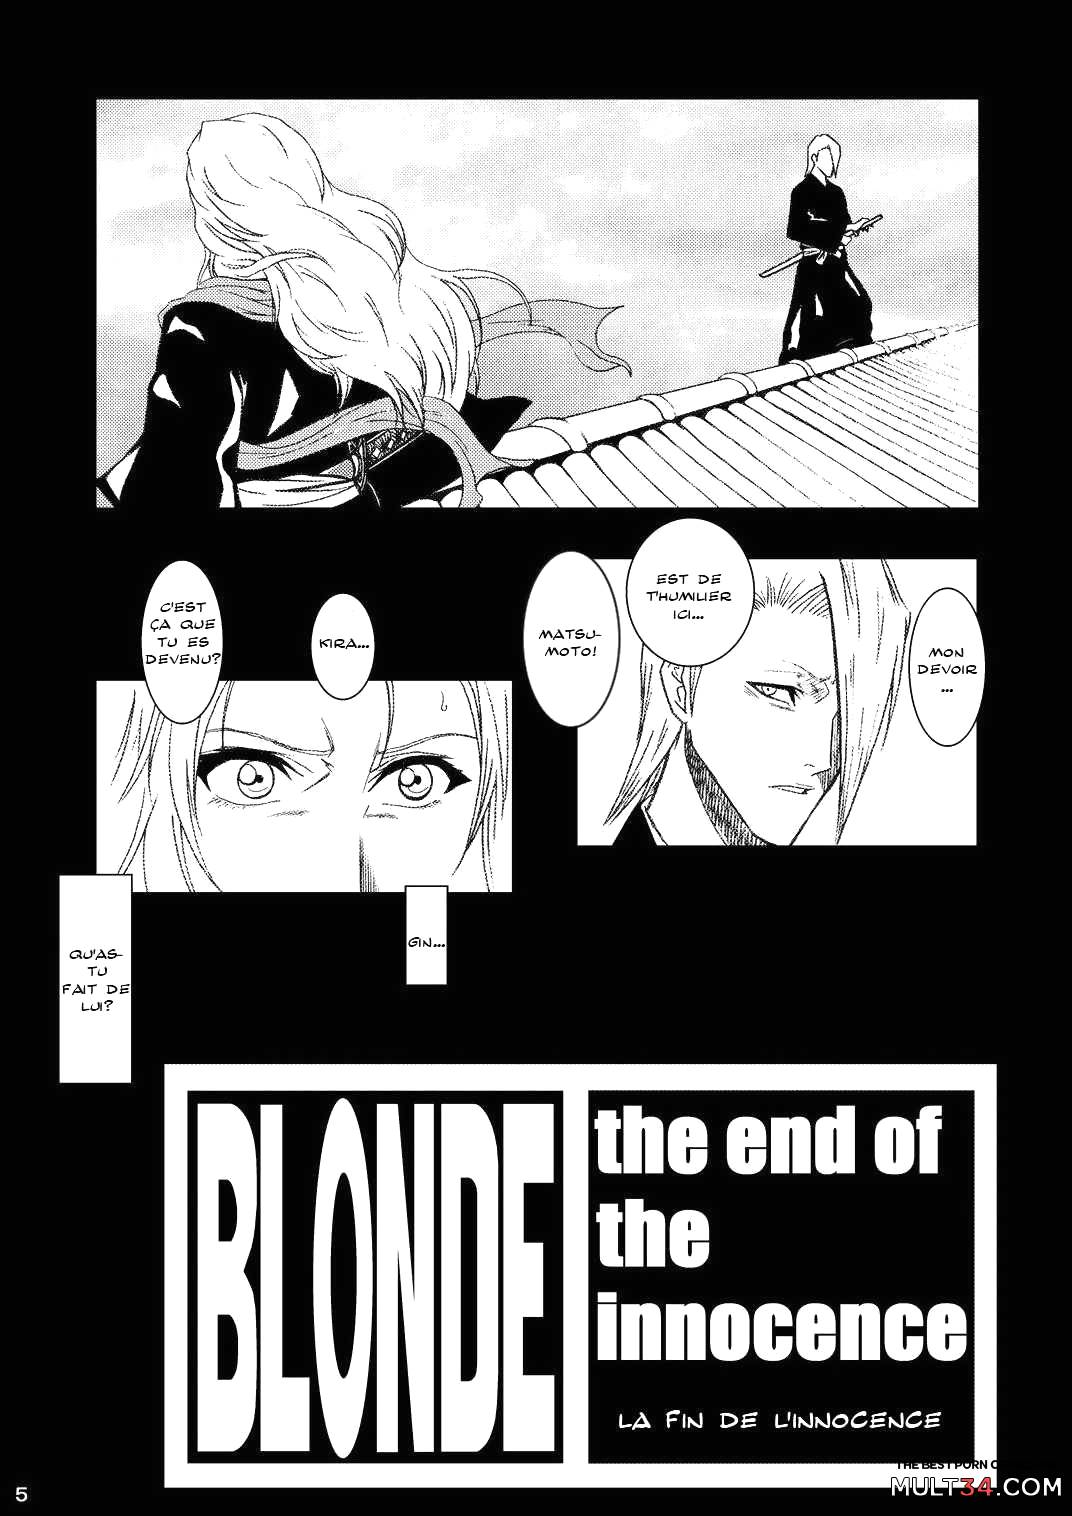 Blonde - End of Innocence page 2